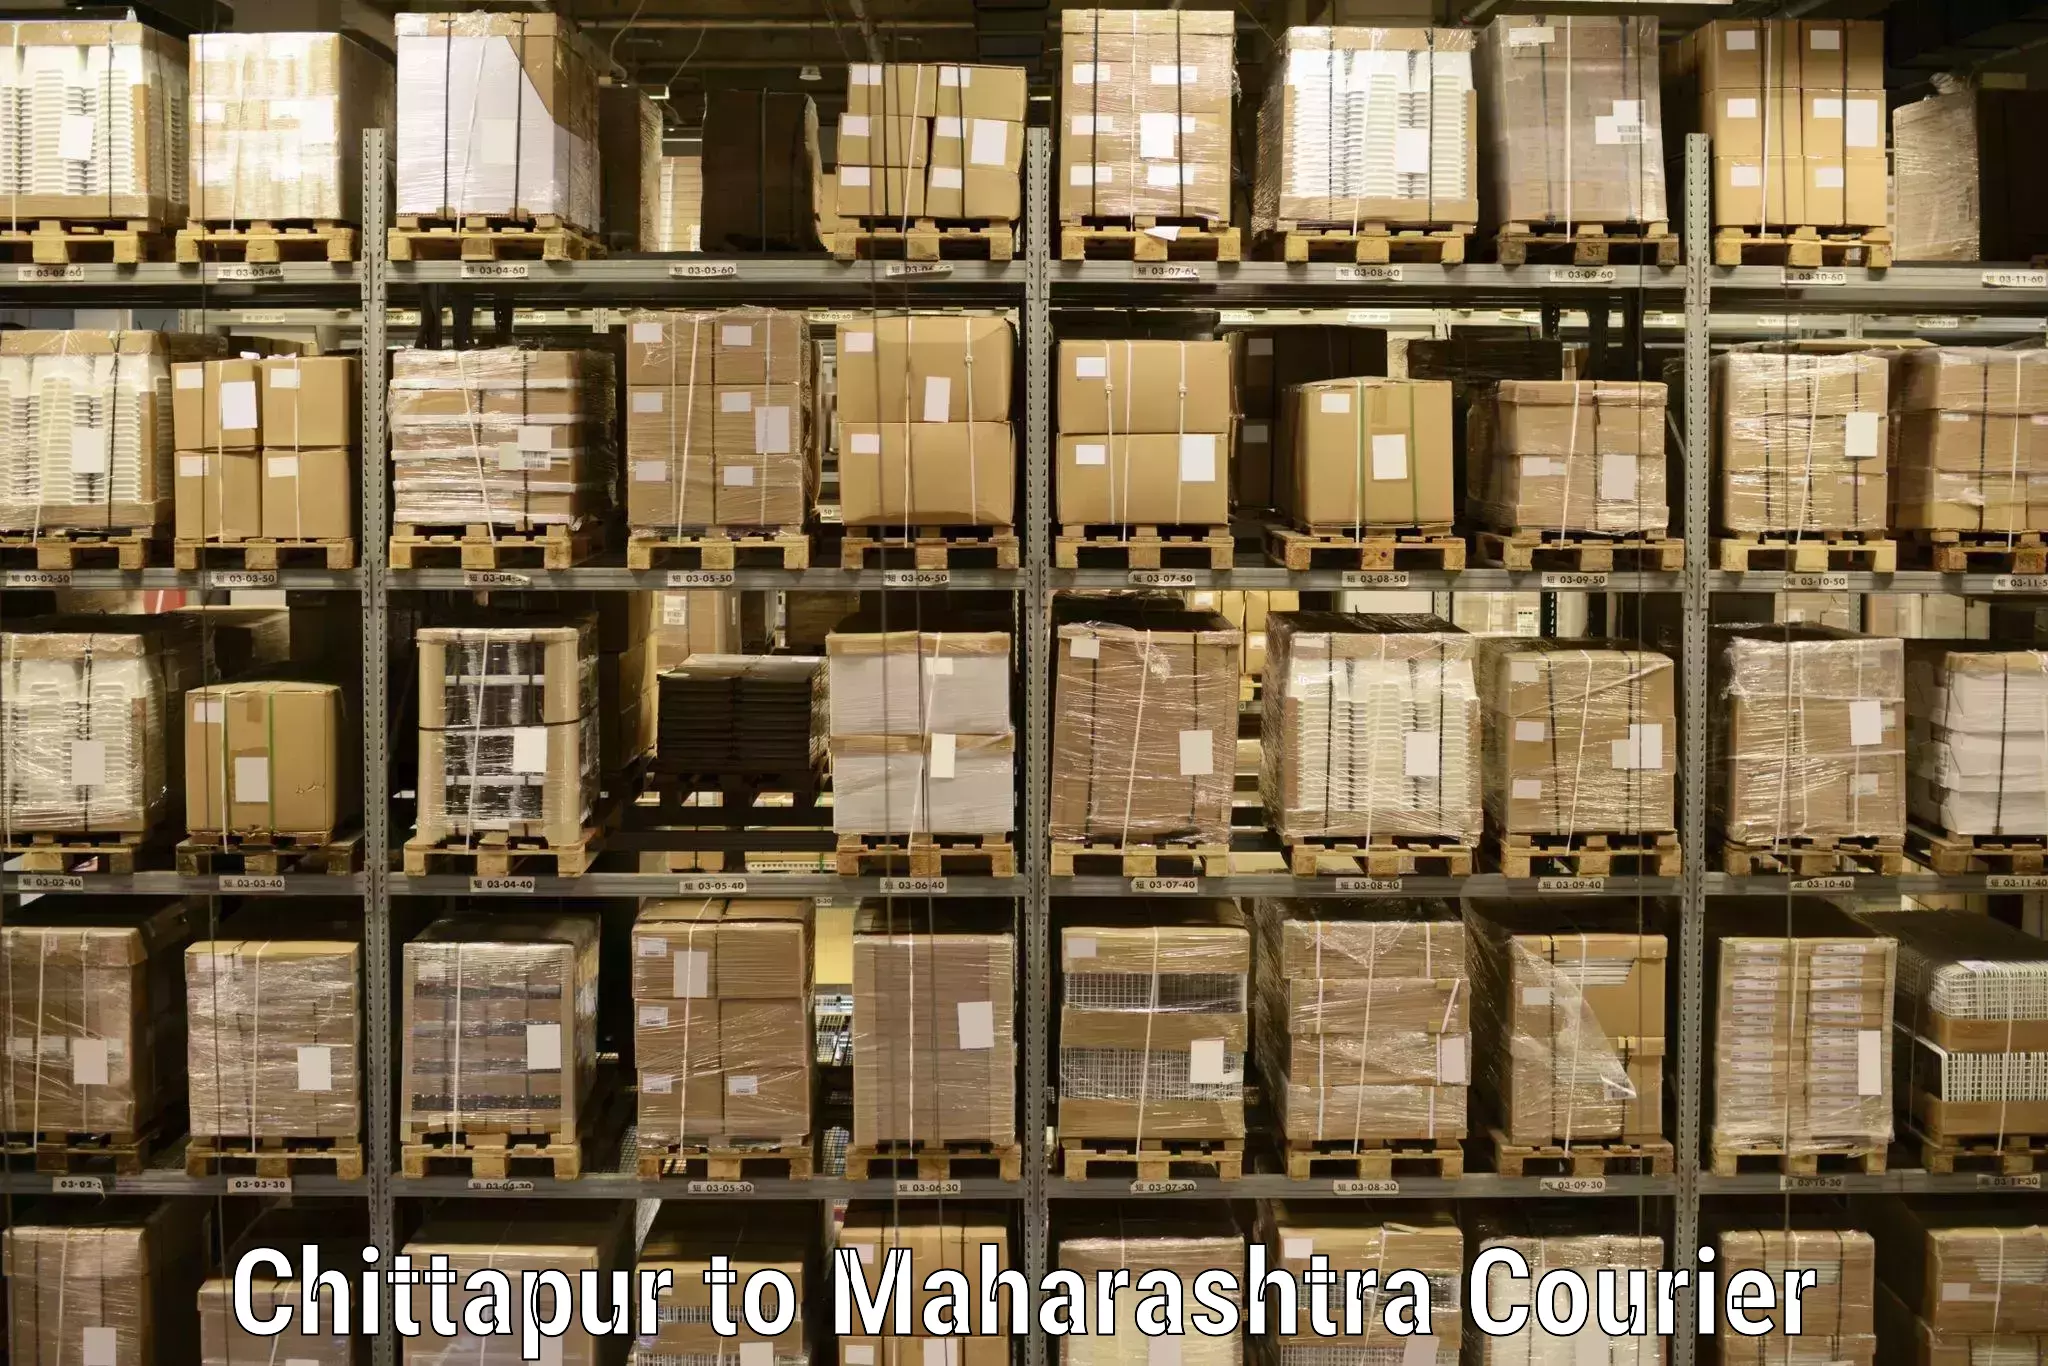 Courier service booking in Chittapur to Chandrapur